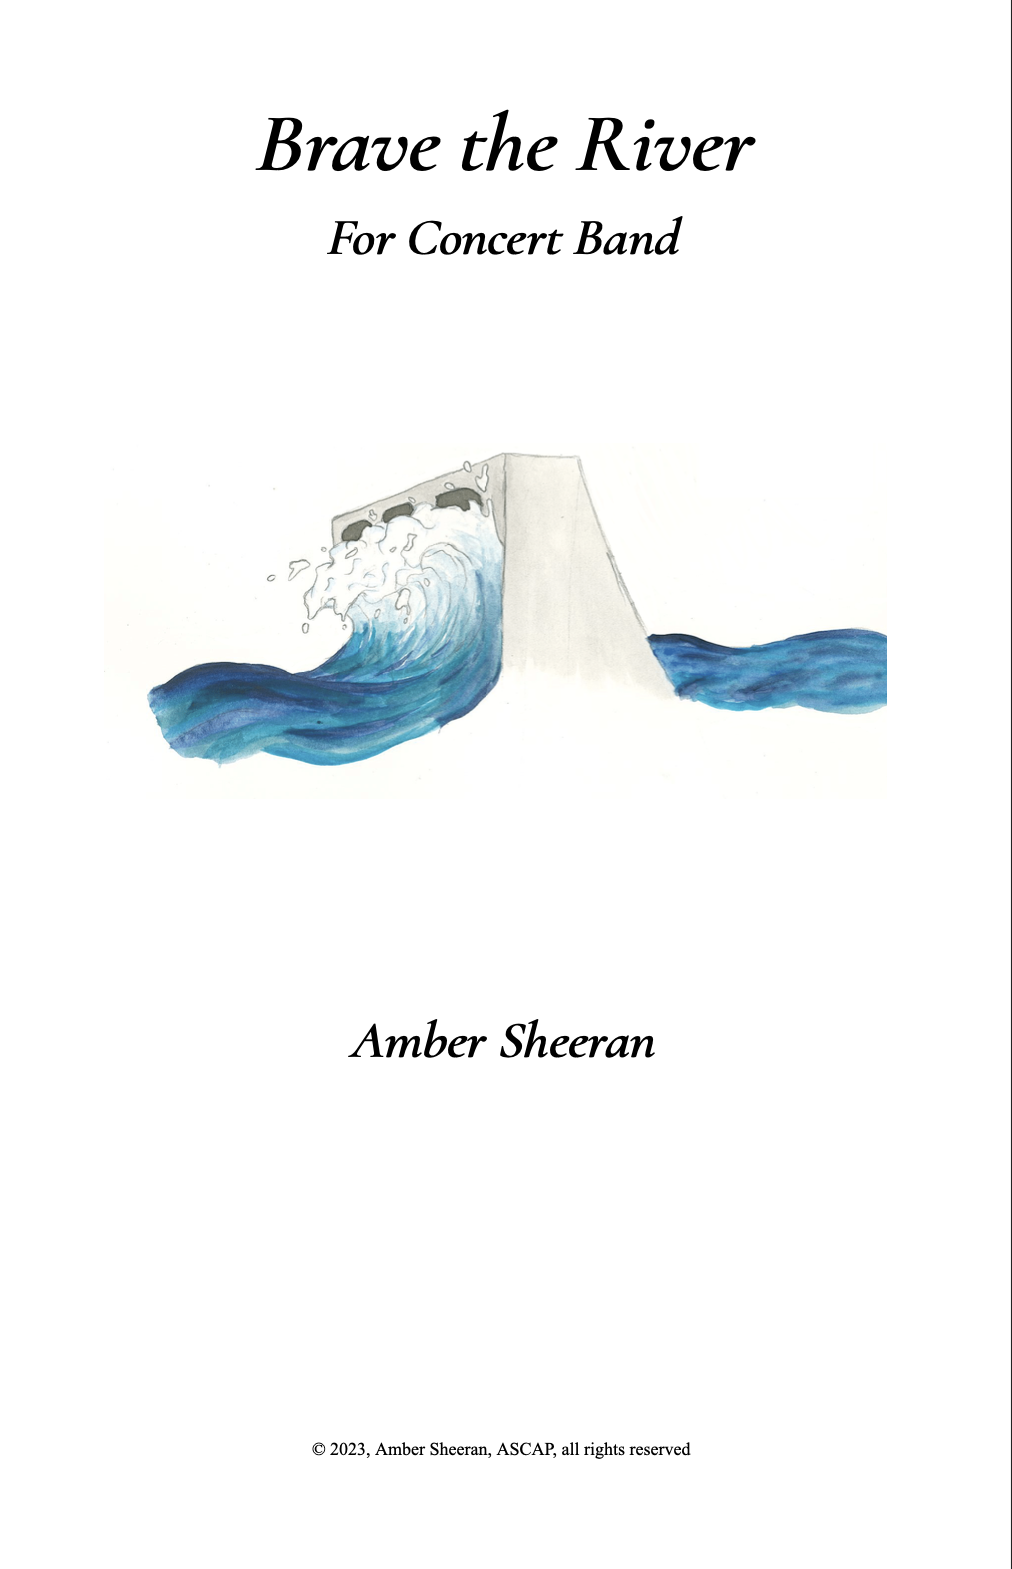 Brave The River (Score Only) by Amber Sheeran